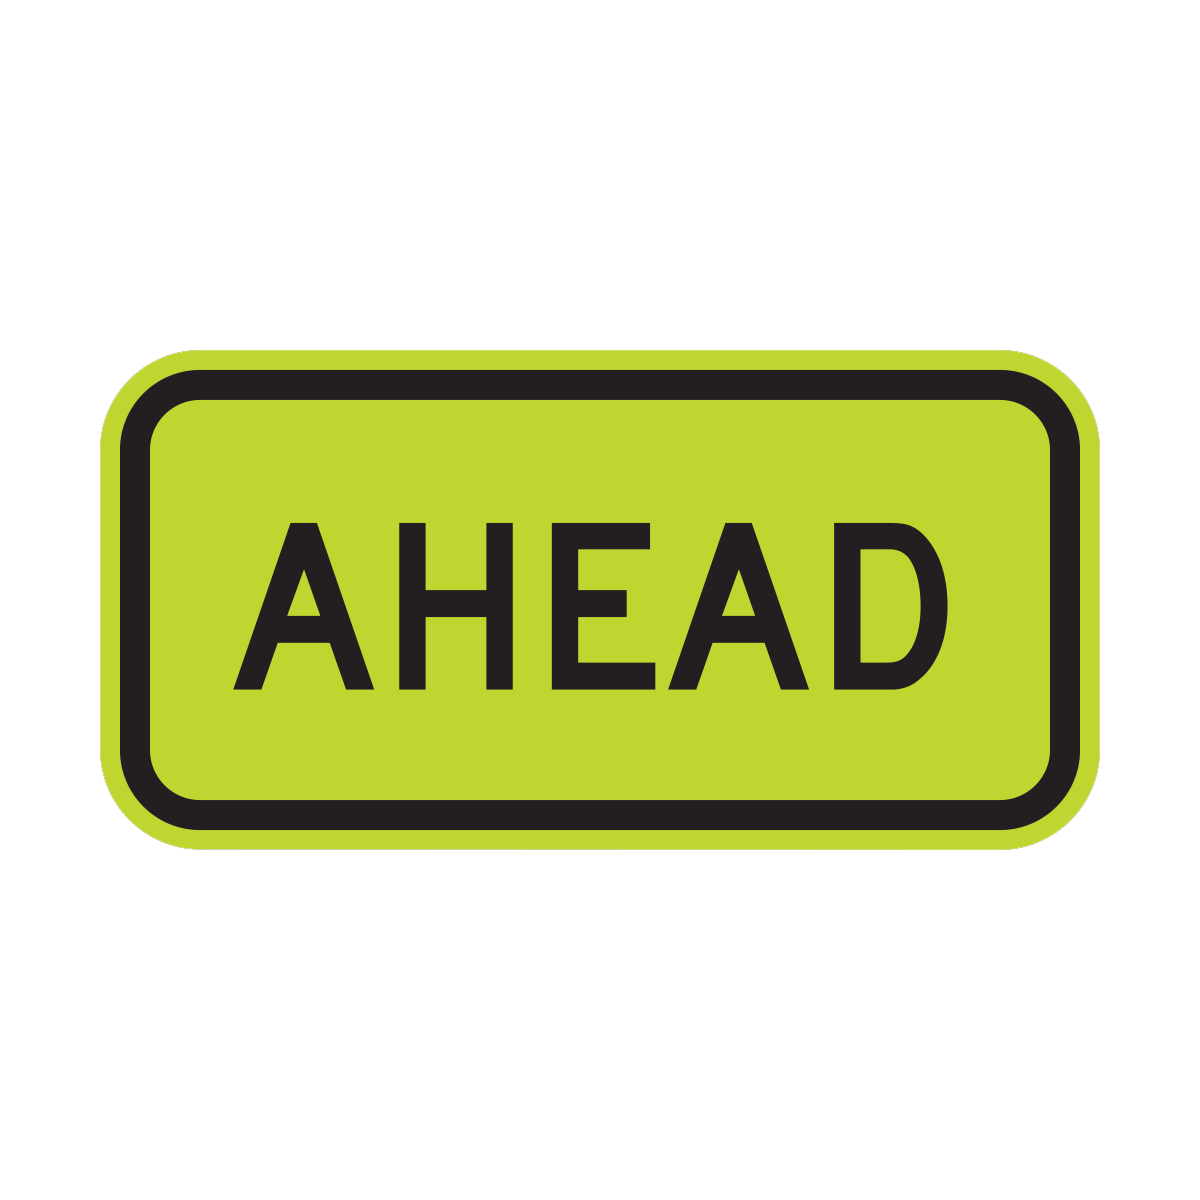 Ahead Sign (W16-9P)